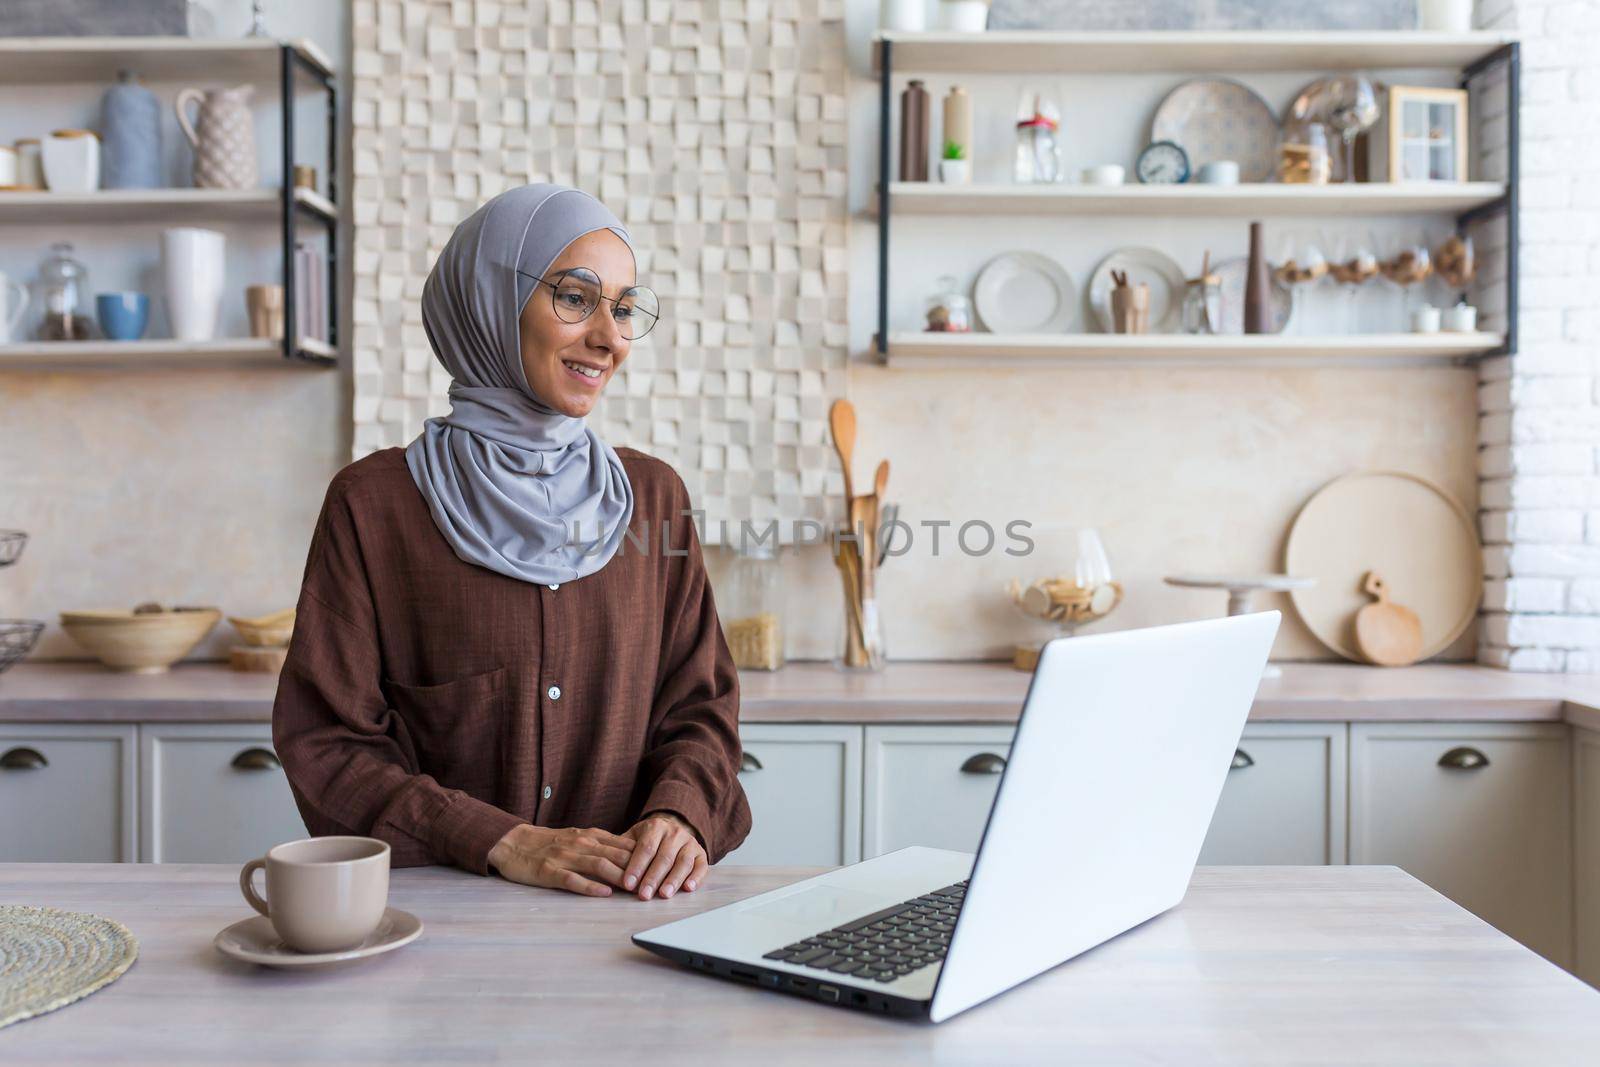 Young beautiful muslim woman in hijab and glasses studying remotely using laptop student woman in kitchen smiling and happy.